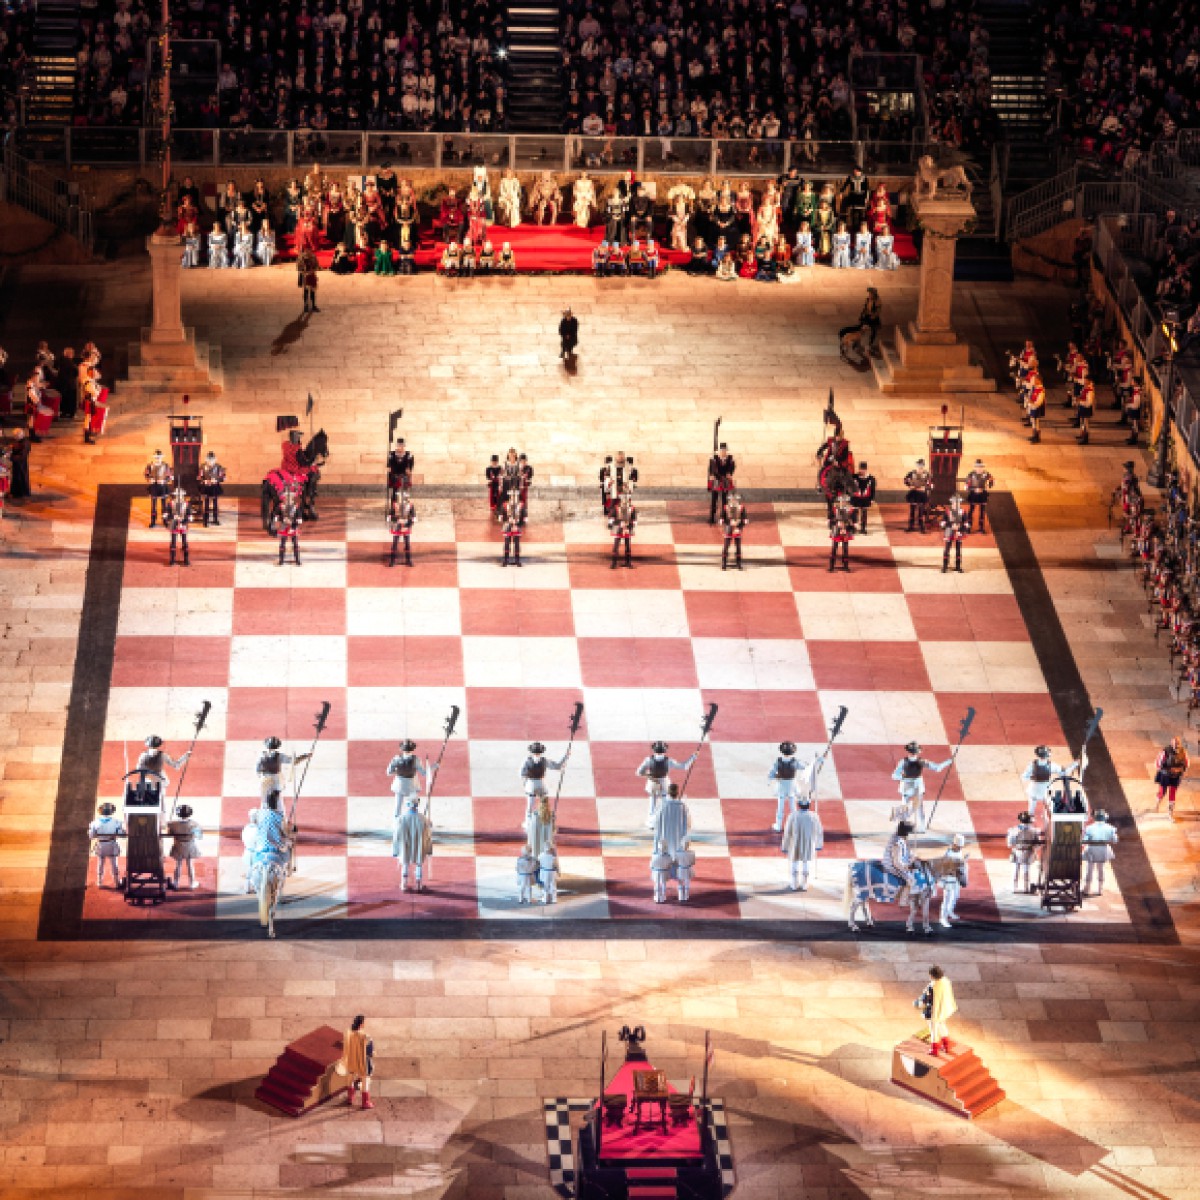 The Marostica Human Chess Game.
A memorable story with an air of legend.